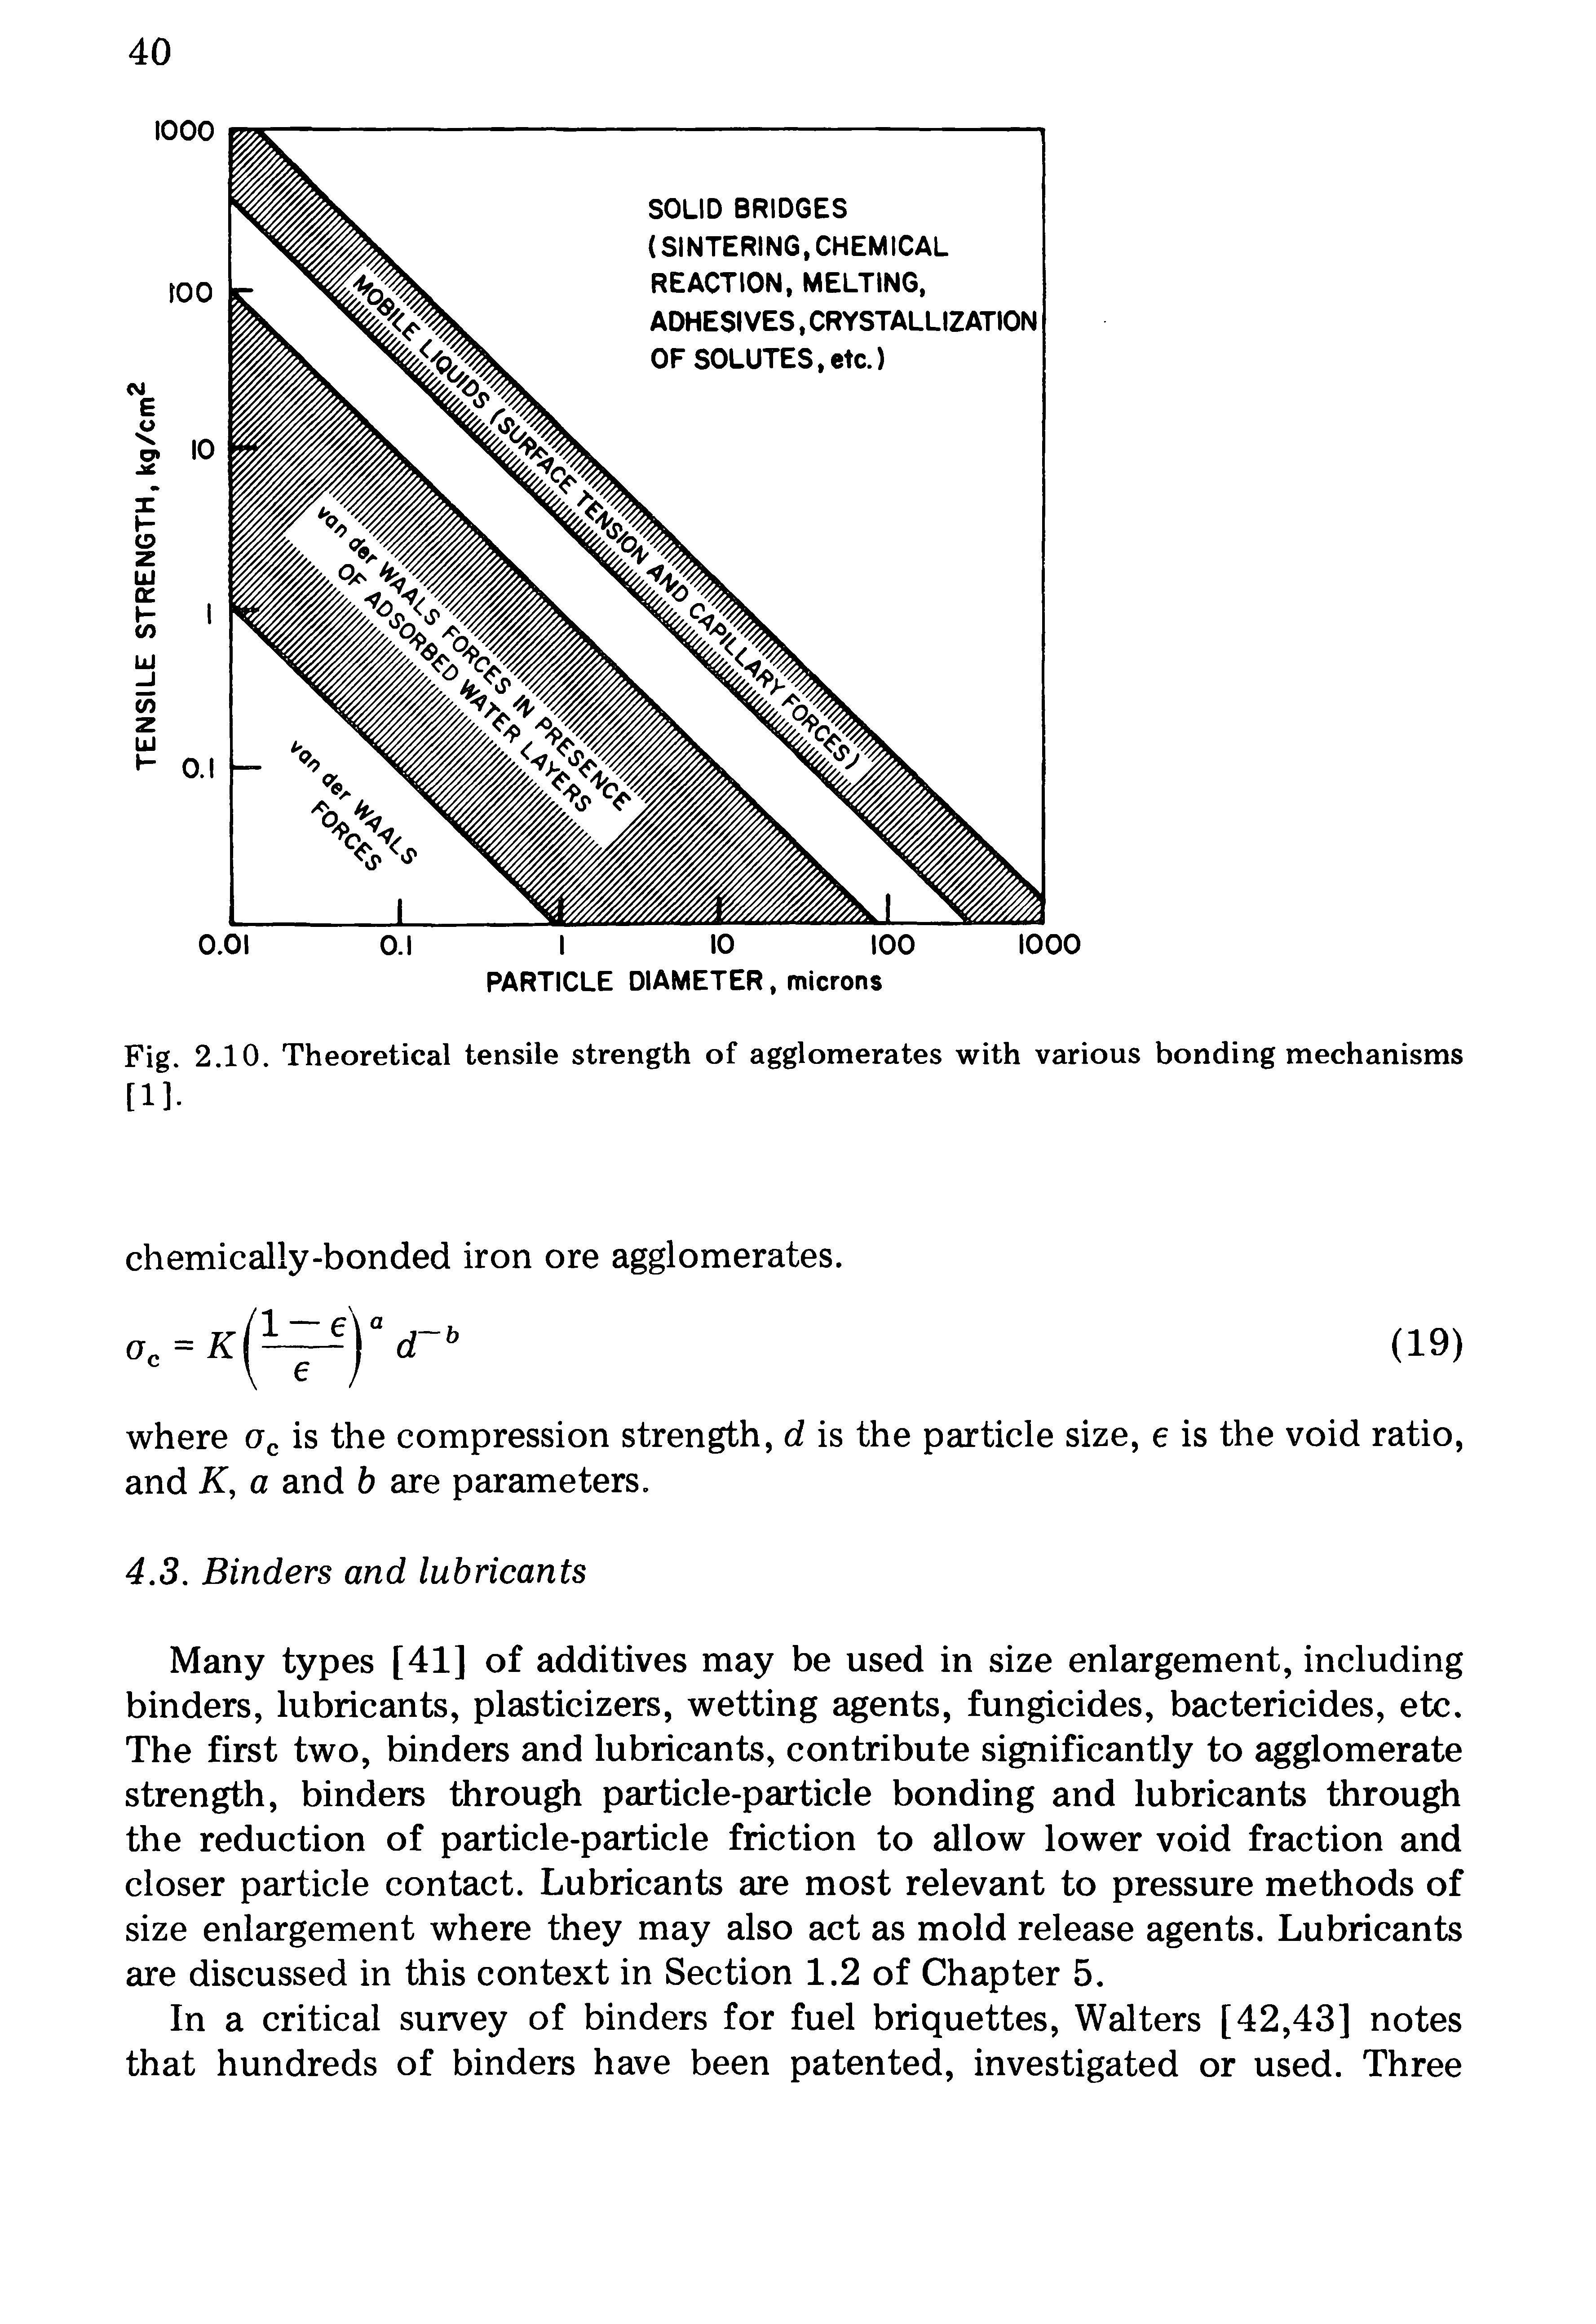 Fig. 2.10. Theoretical tensile strength of agglomerates with various bonding mechanisms [1].